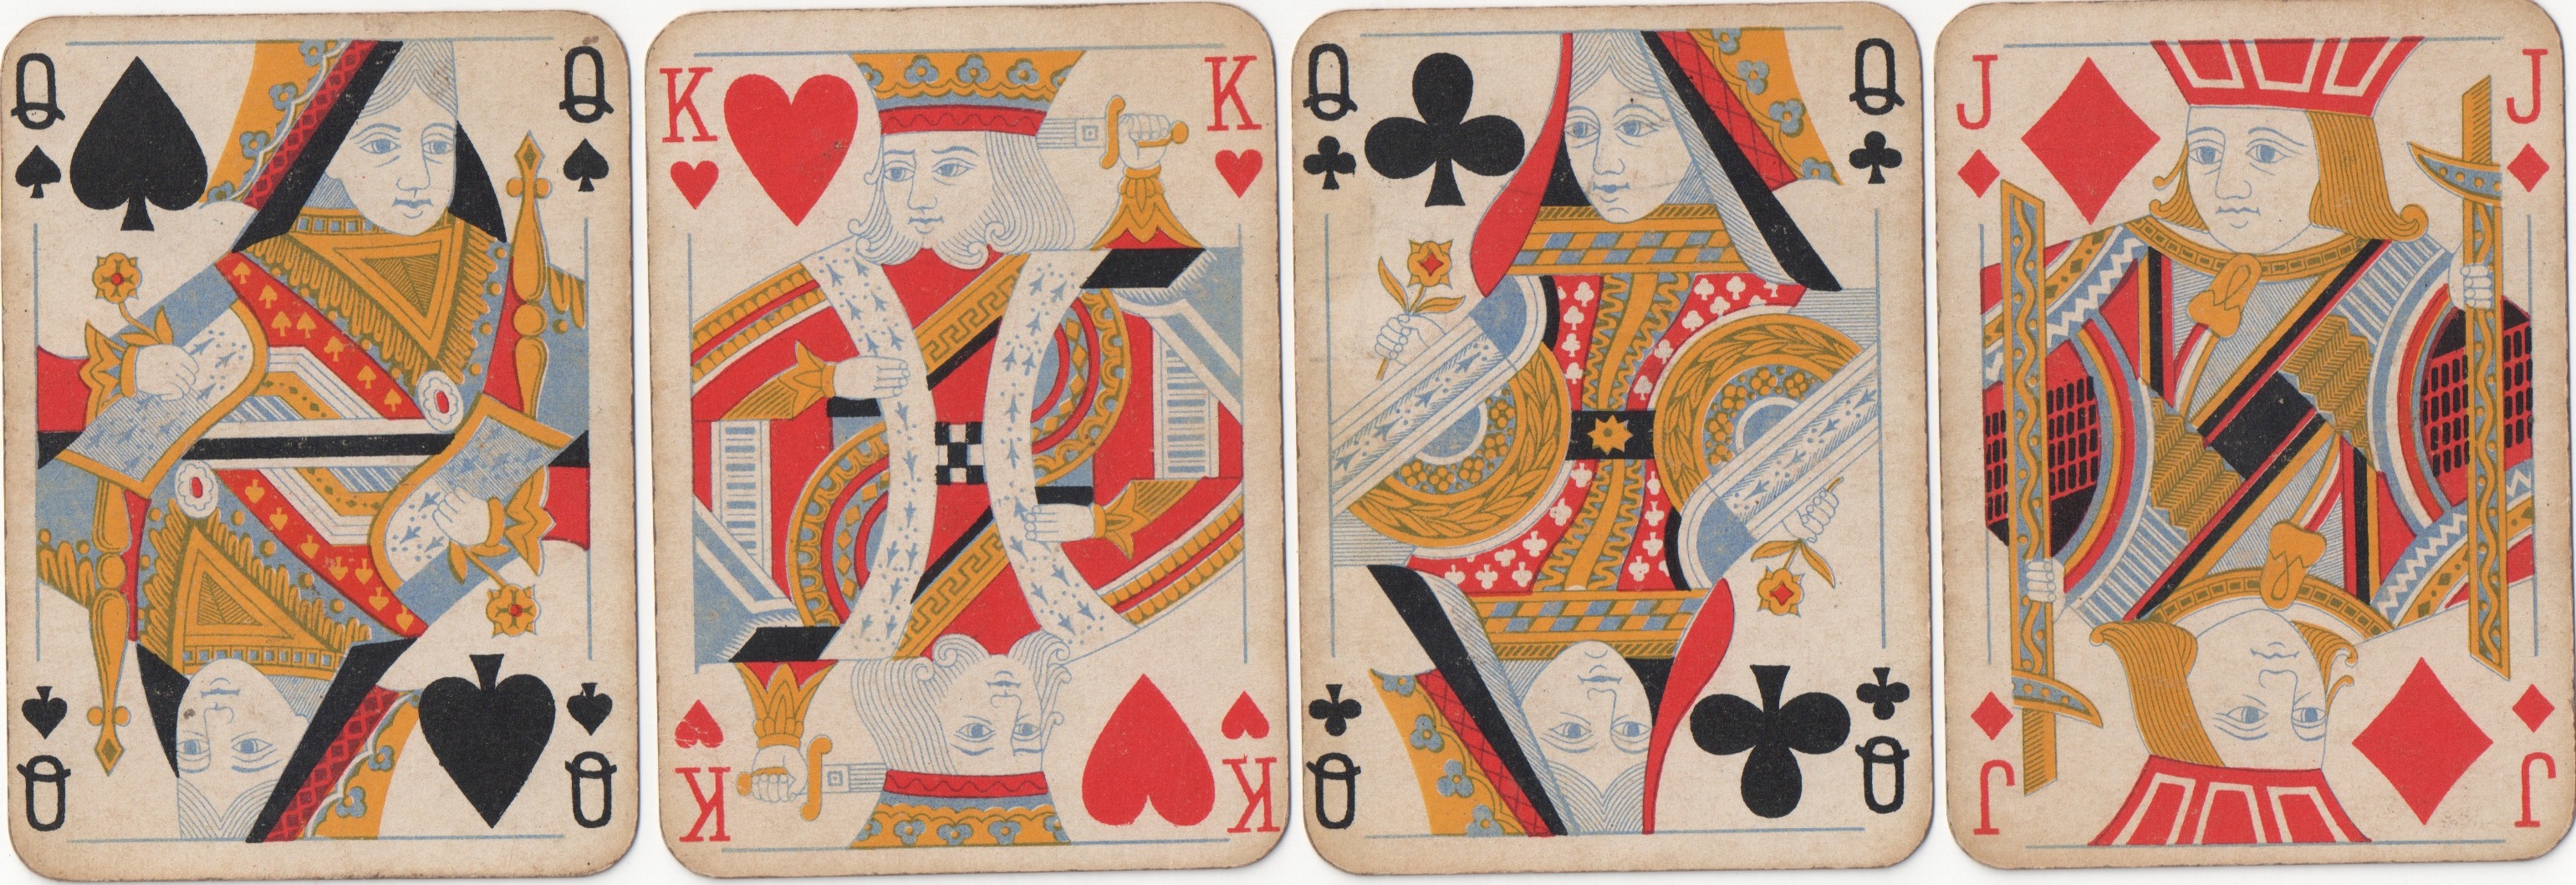 David Westenedge Deluxe Playing Cards Different Designs Available 